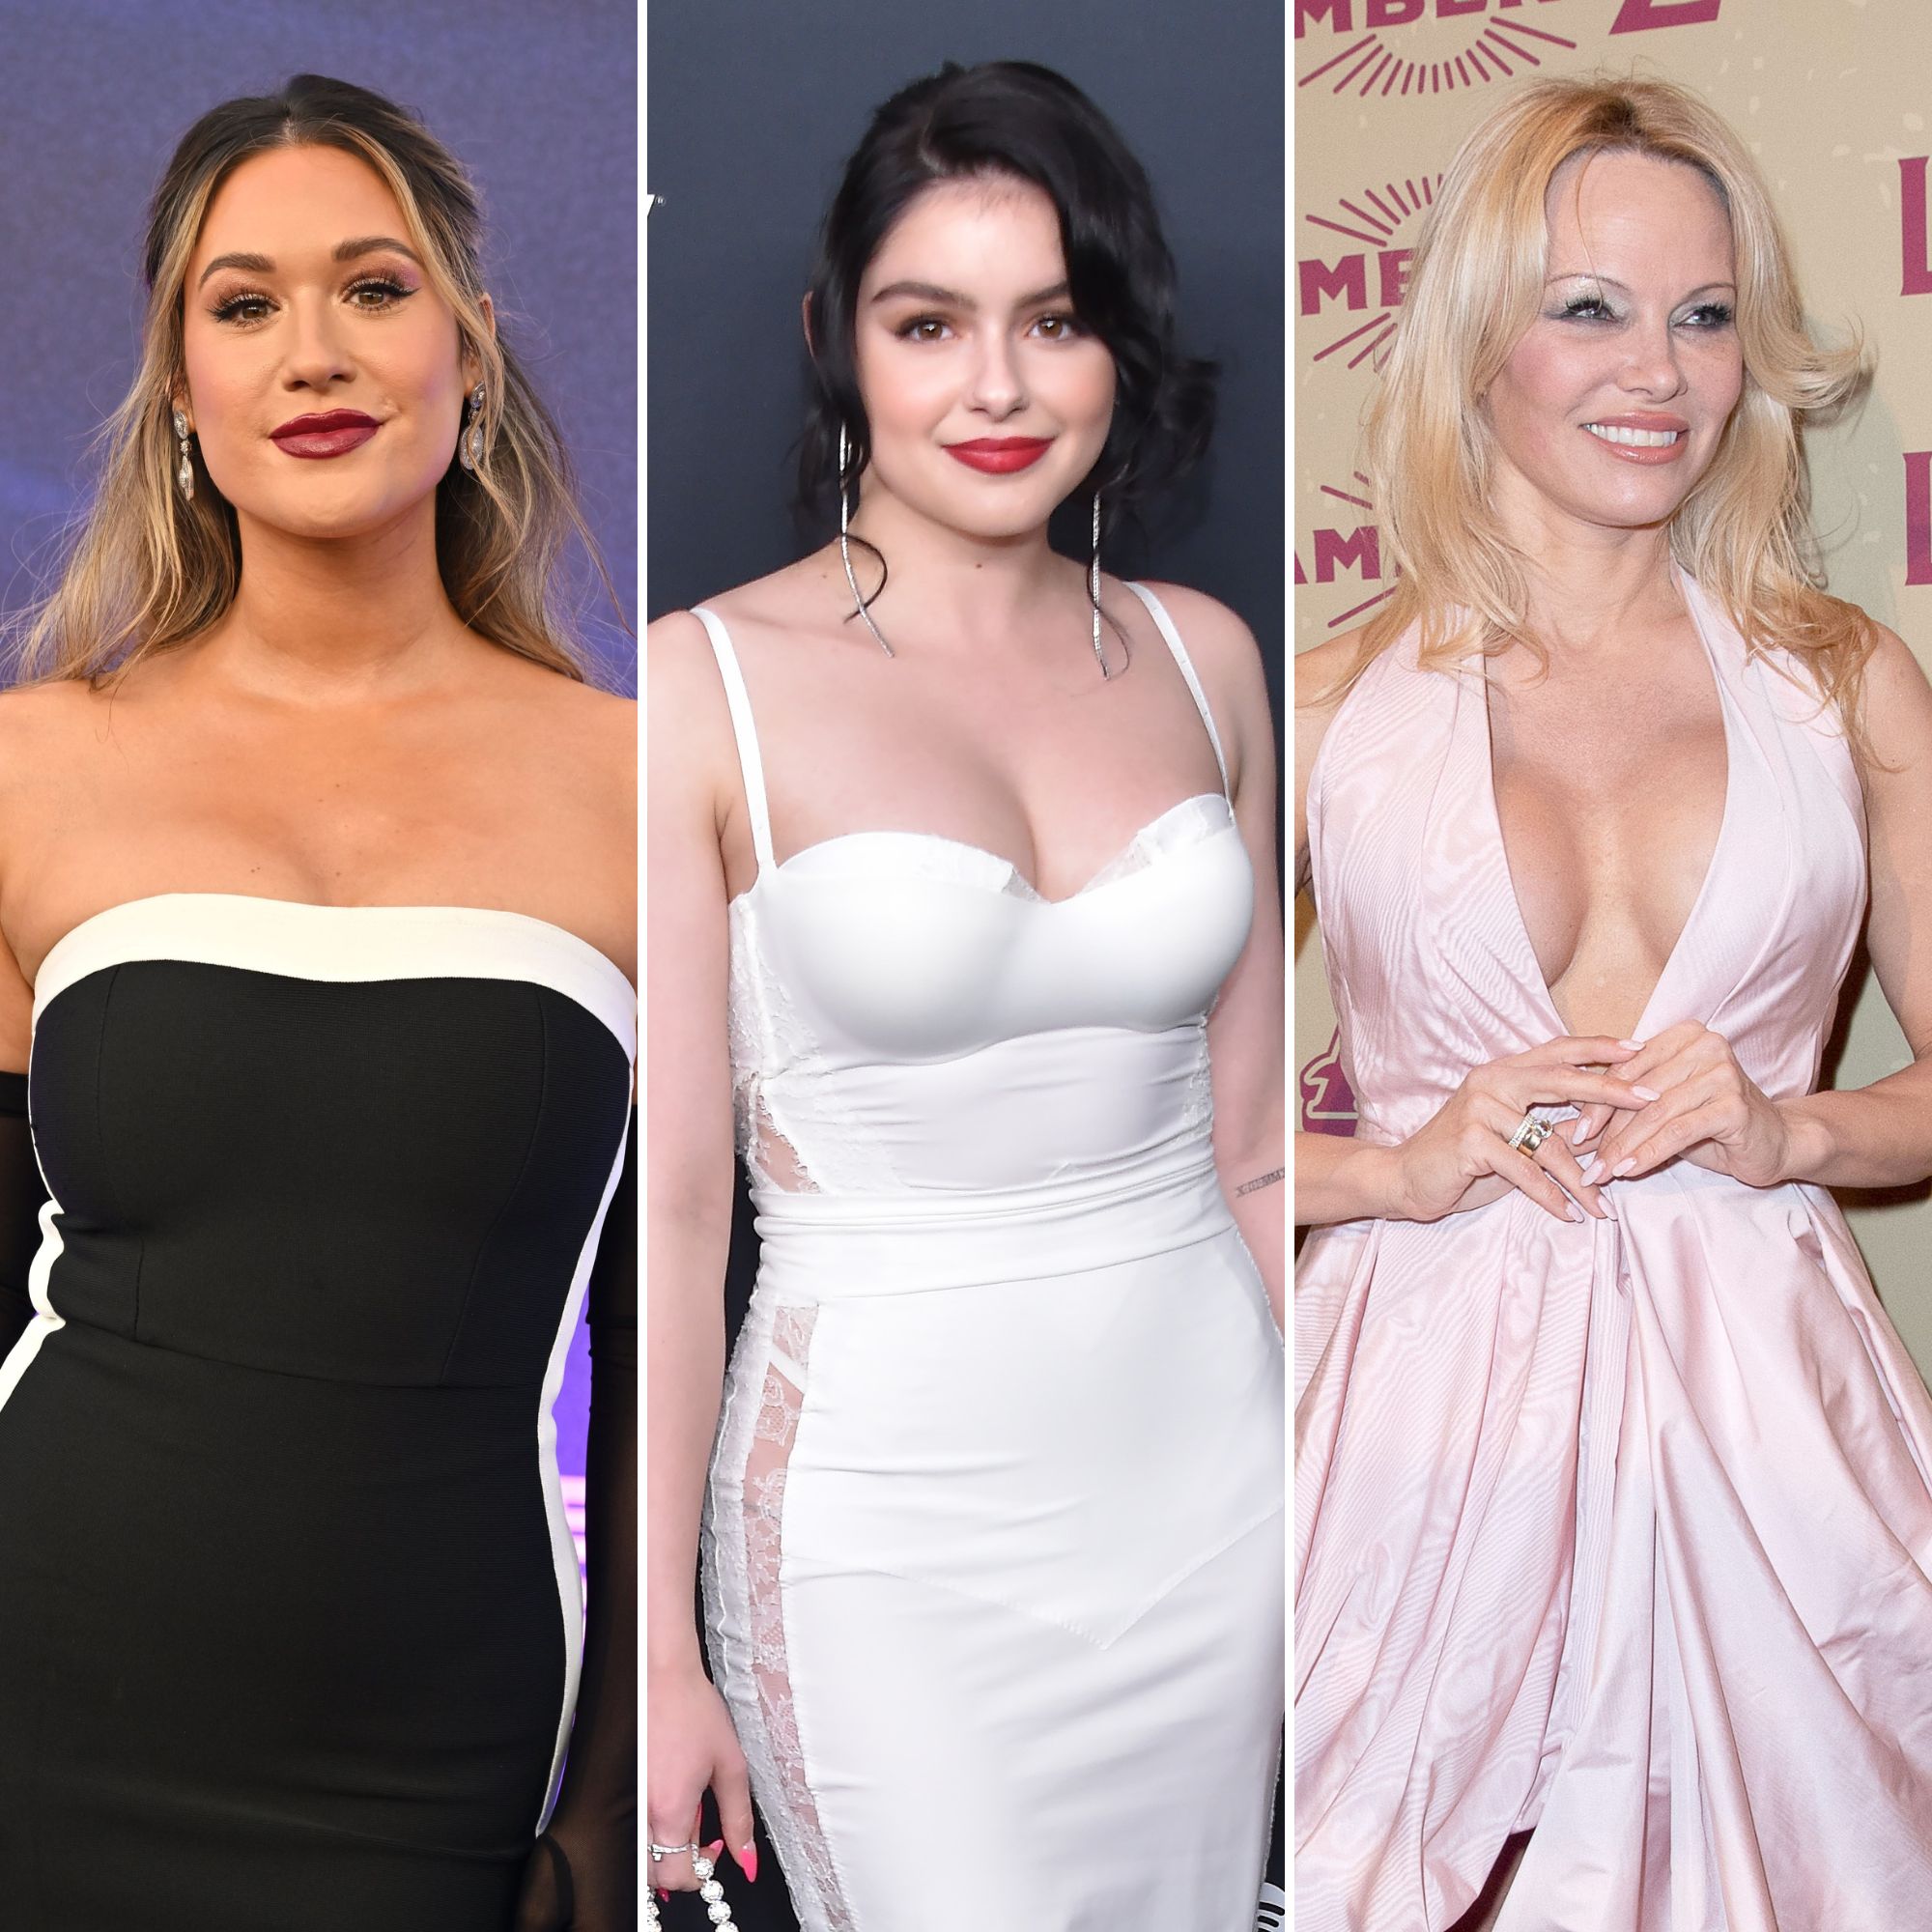 Was this Celebrity's Breast Reduction a Huge Mistake